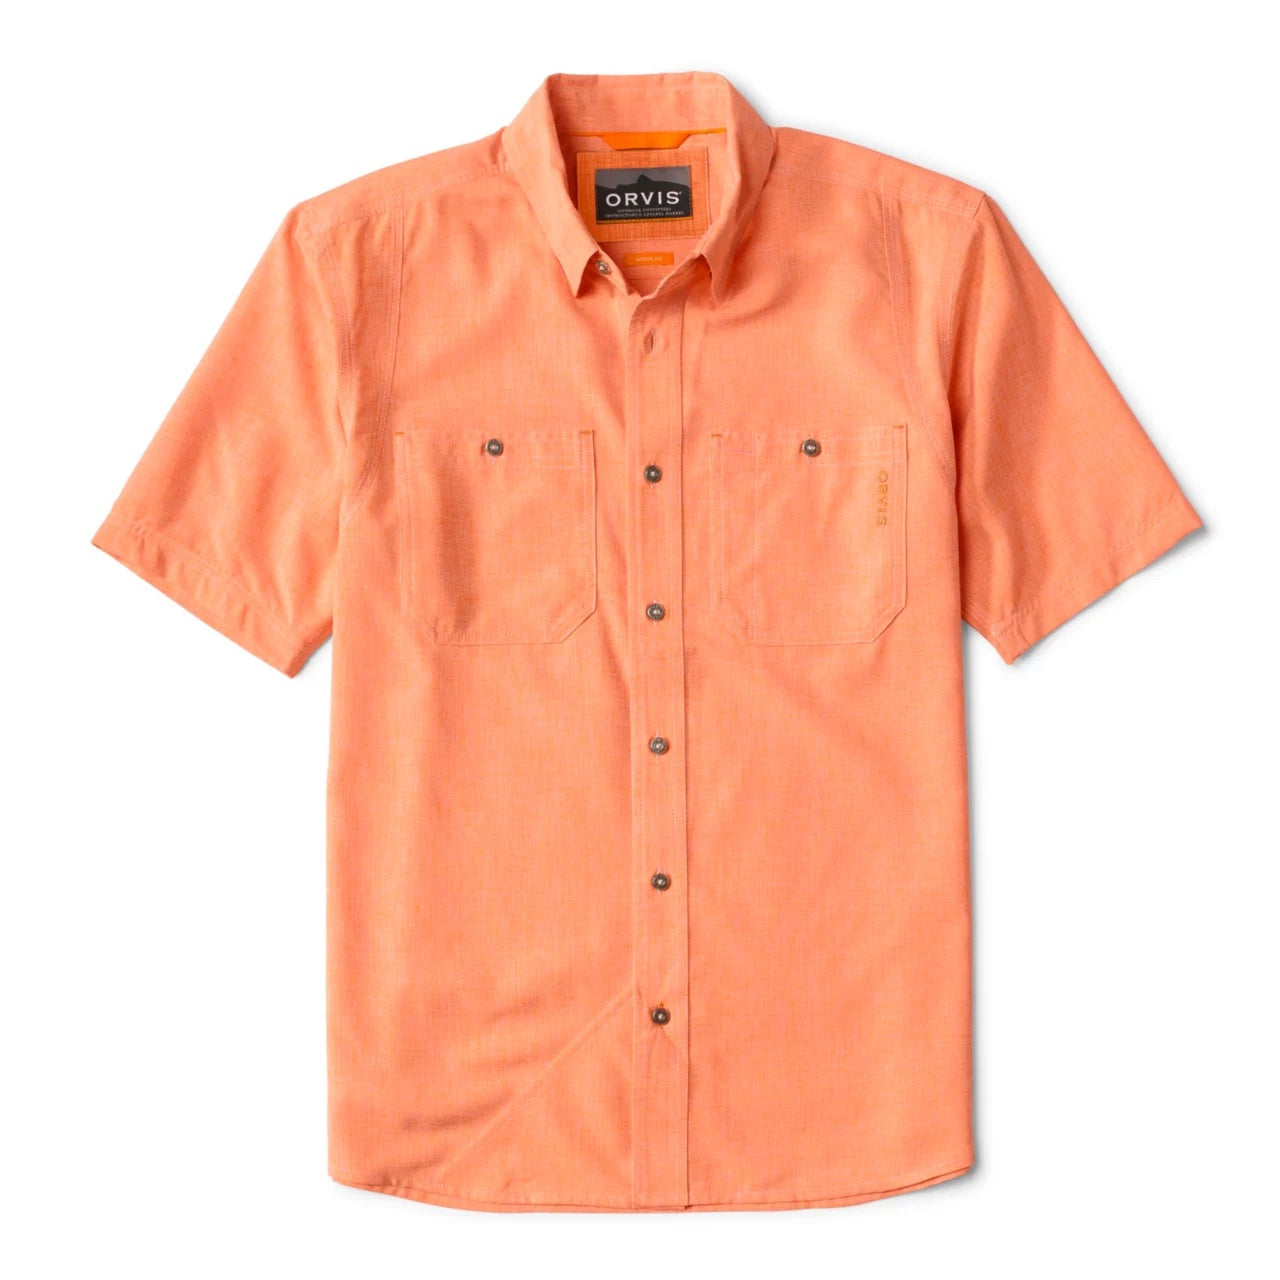 Orvis LS Tech Chambray Work Shirt / Blue Moon - Andy Thornal Company